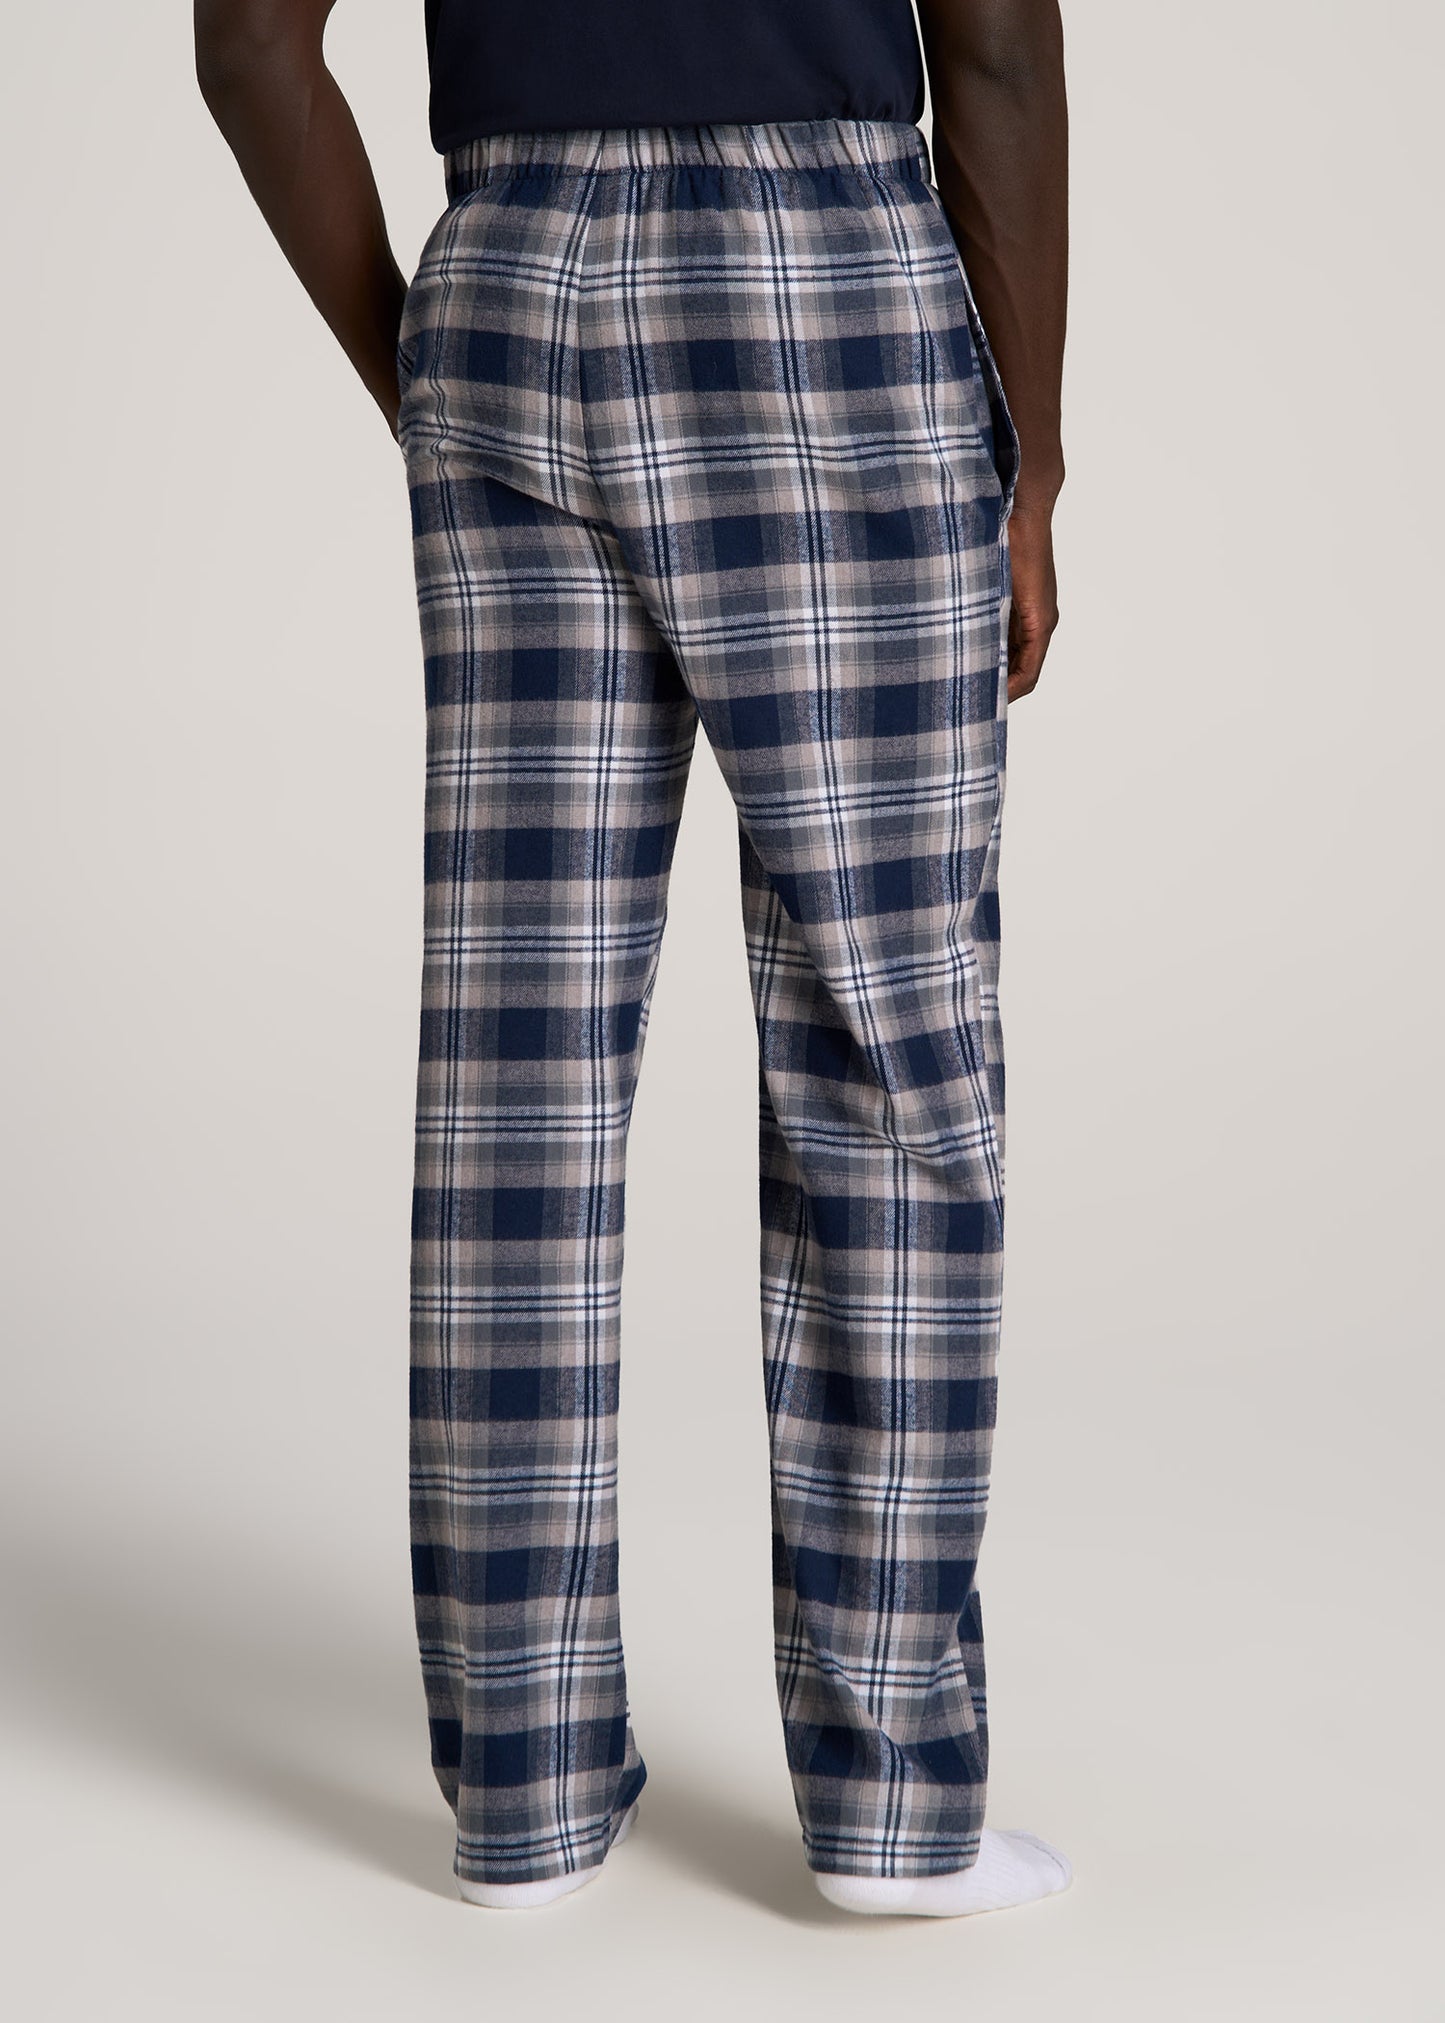 Plaid Pajama Pants for Tall Men in Navy and Grey Plaid